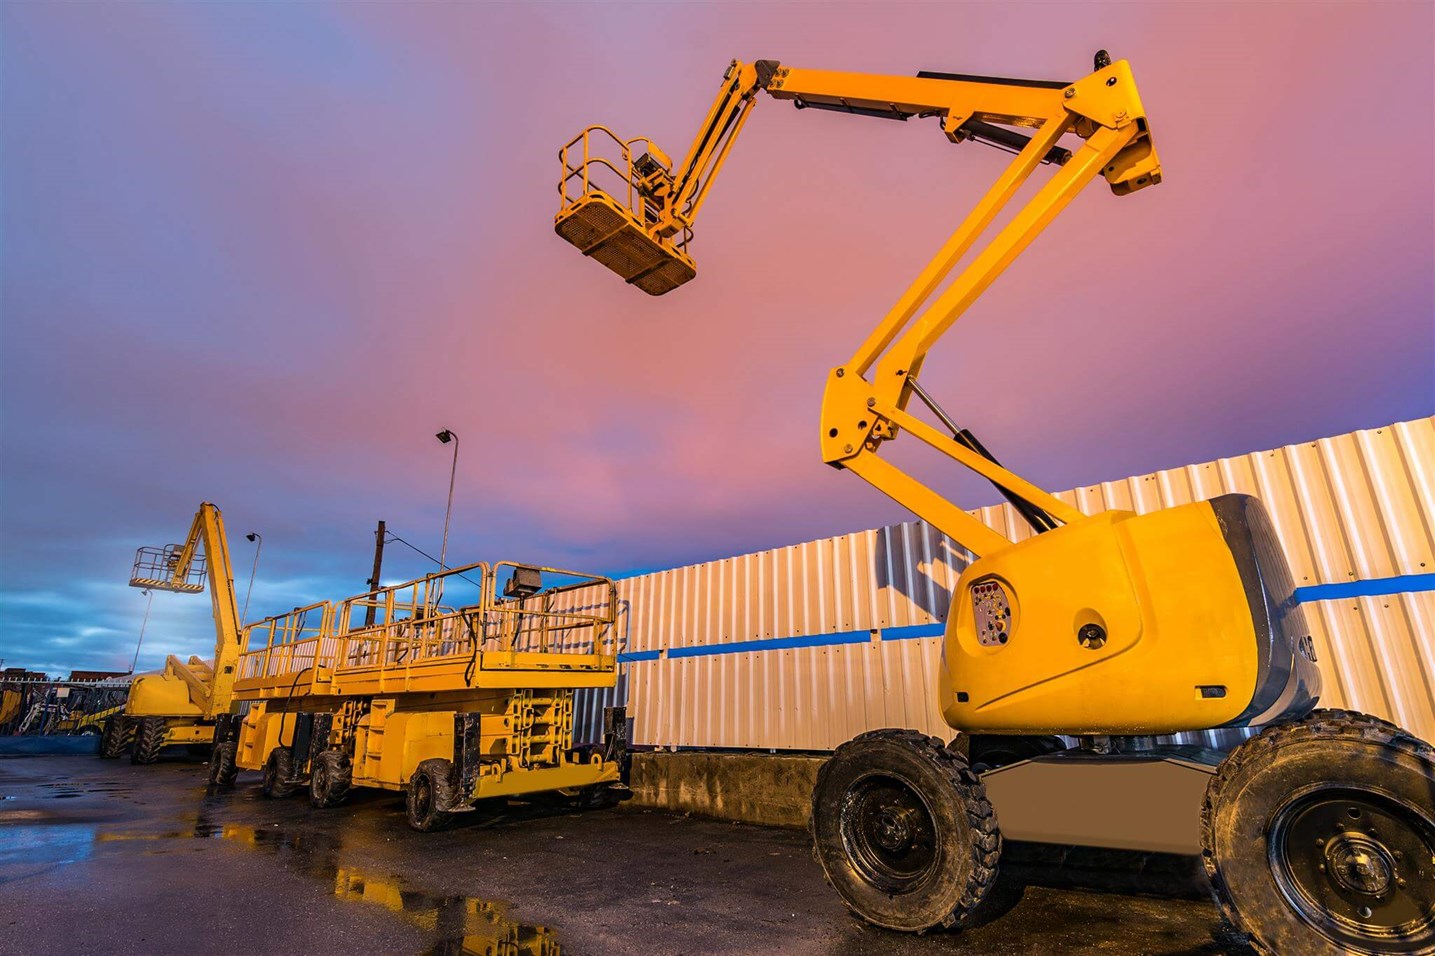 Boom lifts, scissor lifts and telehandlers: characteristics and information to know them